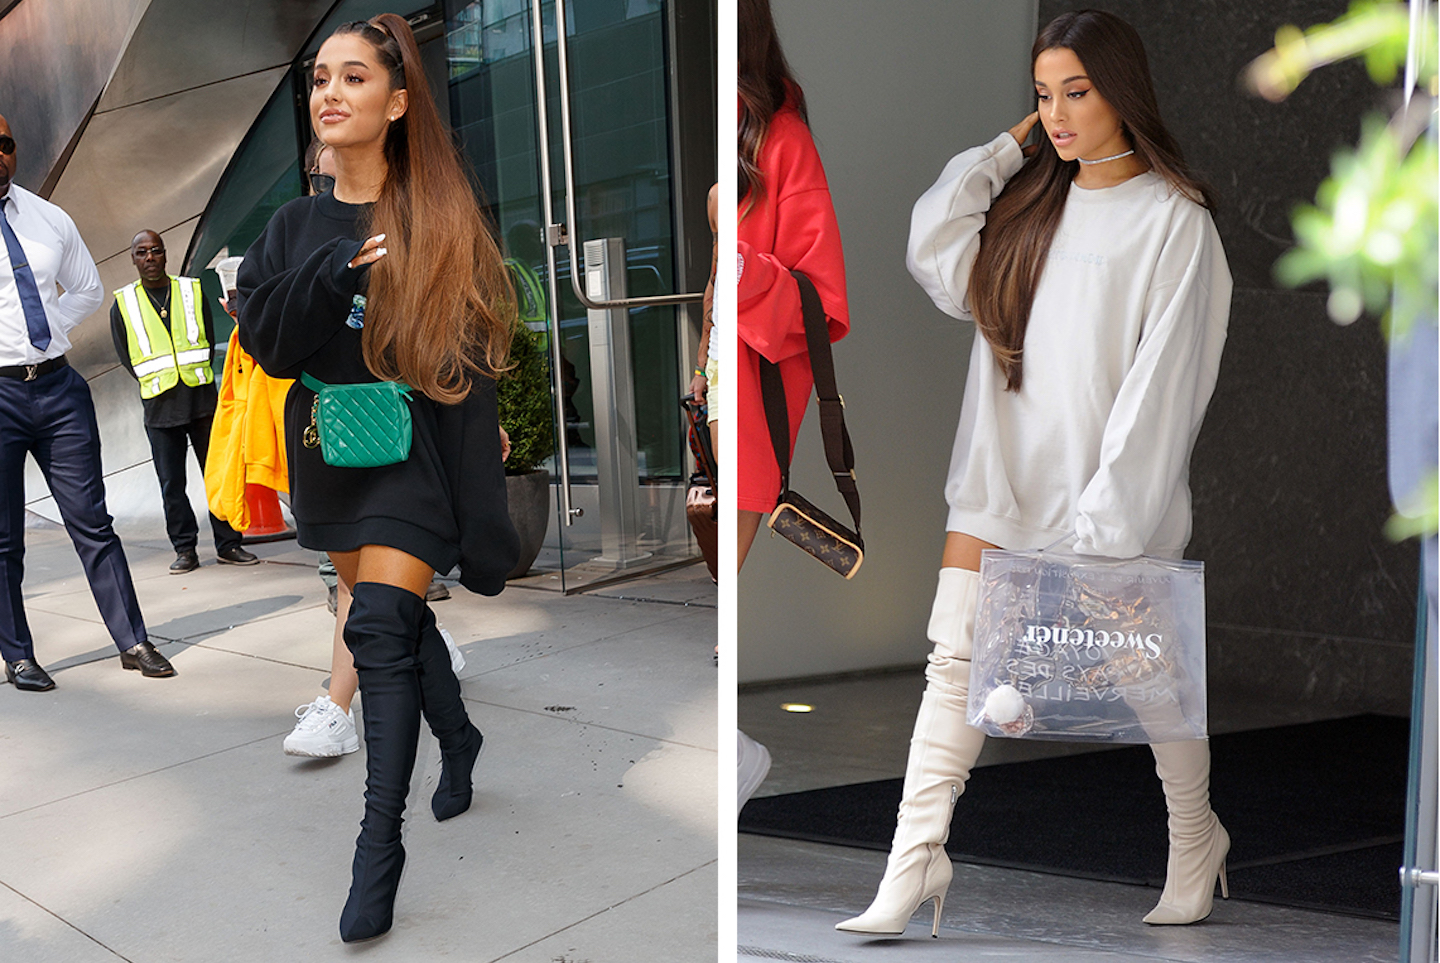 Ariana Grande Hoodies Were the Most Popular Fashion Trend of 2018